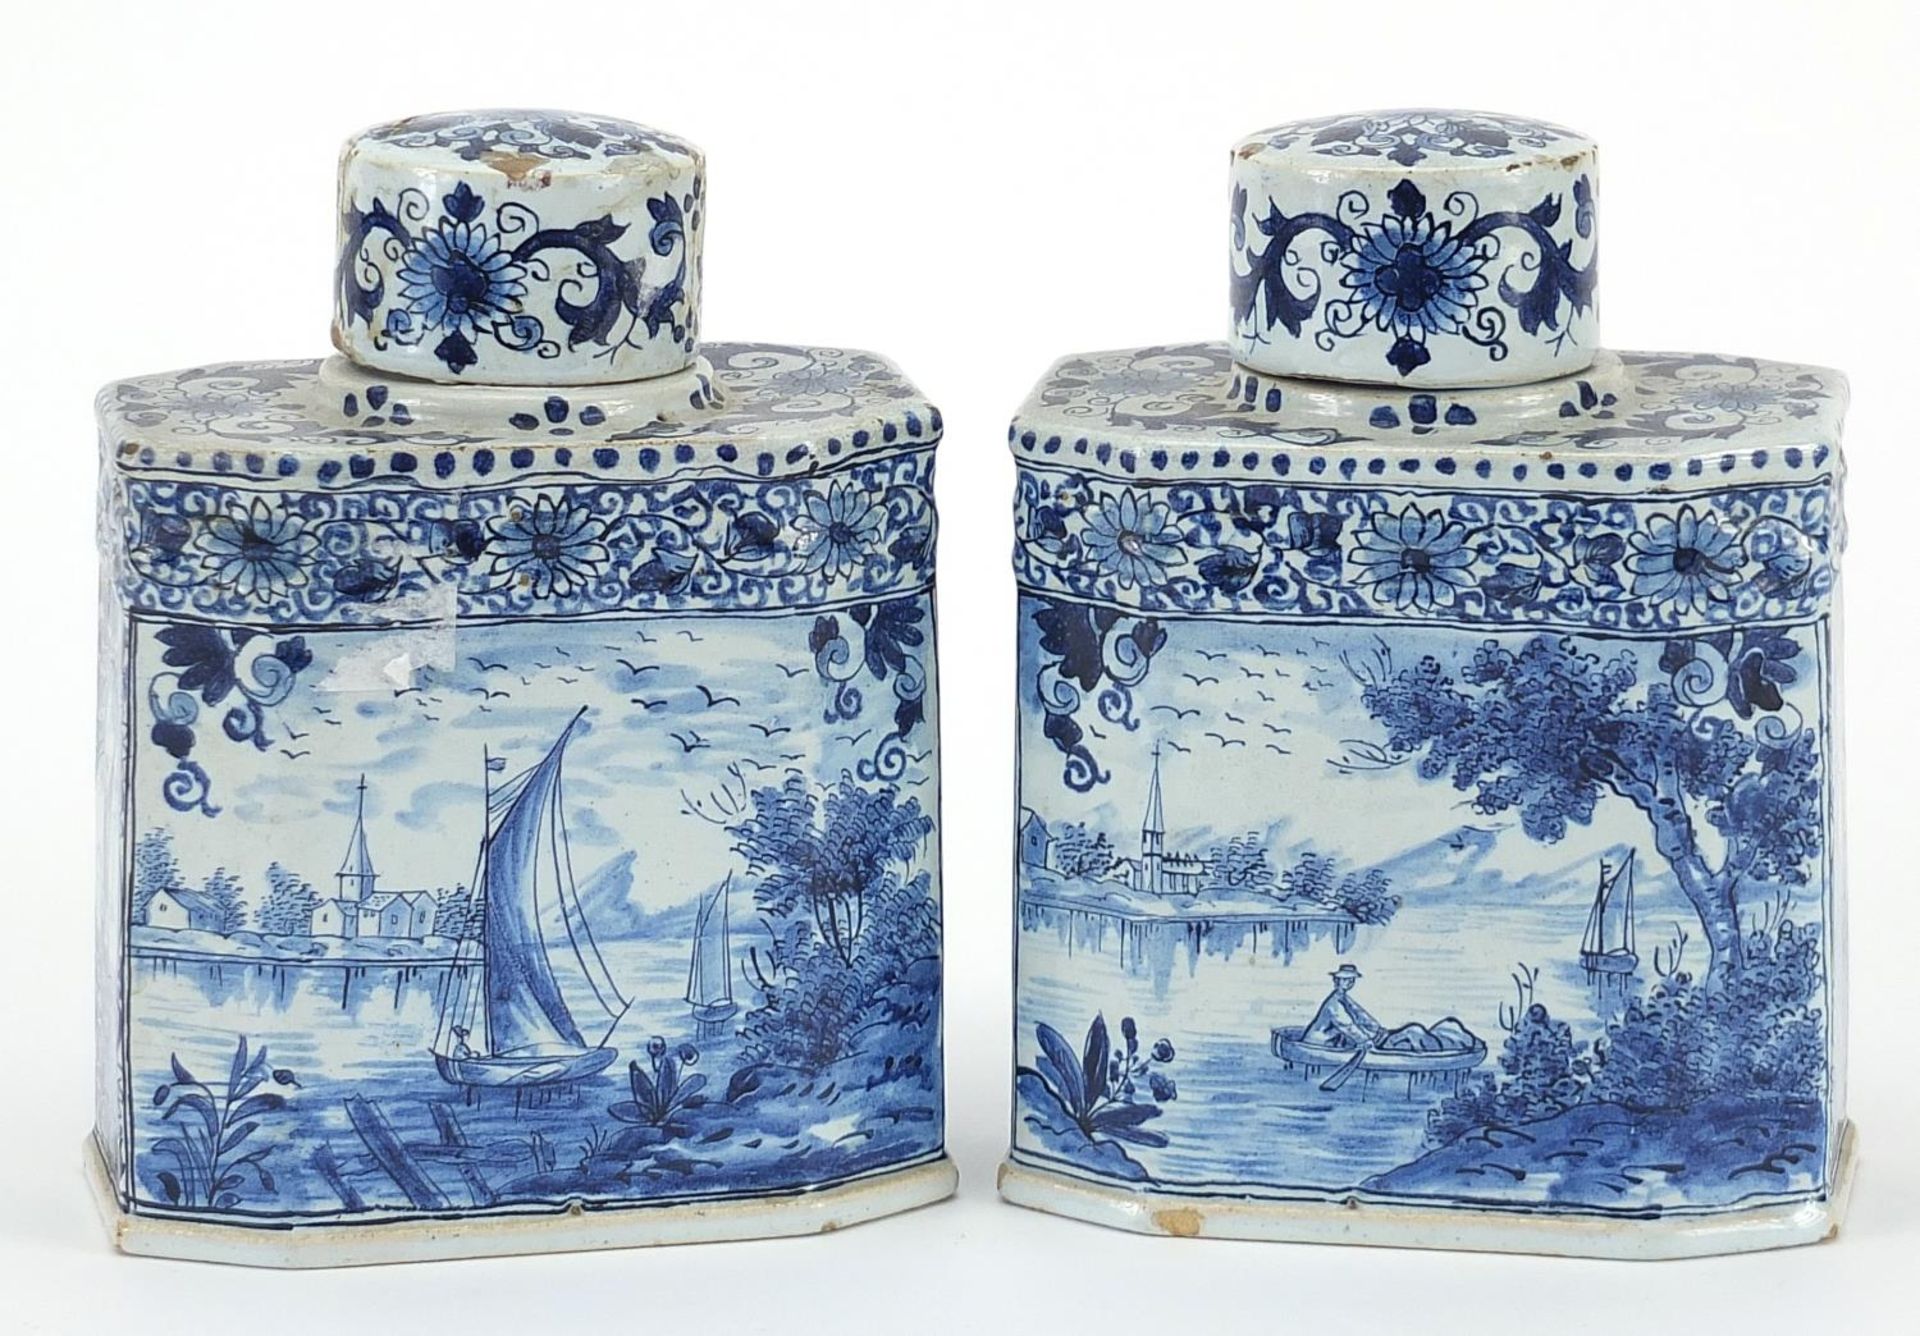 Pair of Delft tin glazed pottery tea caddies hand painted with traditional Dutch figures in - Image 2 of 4